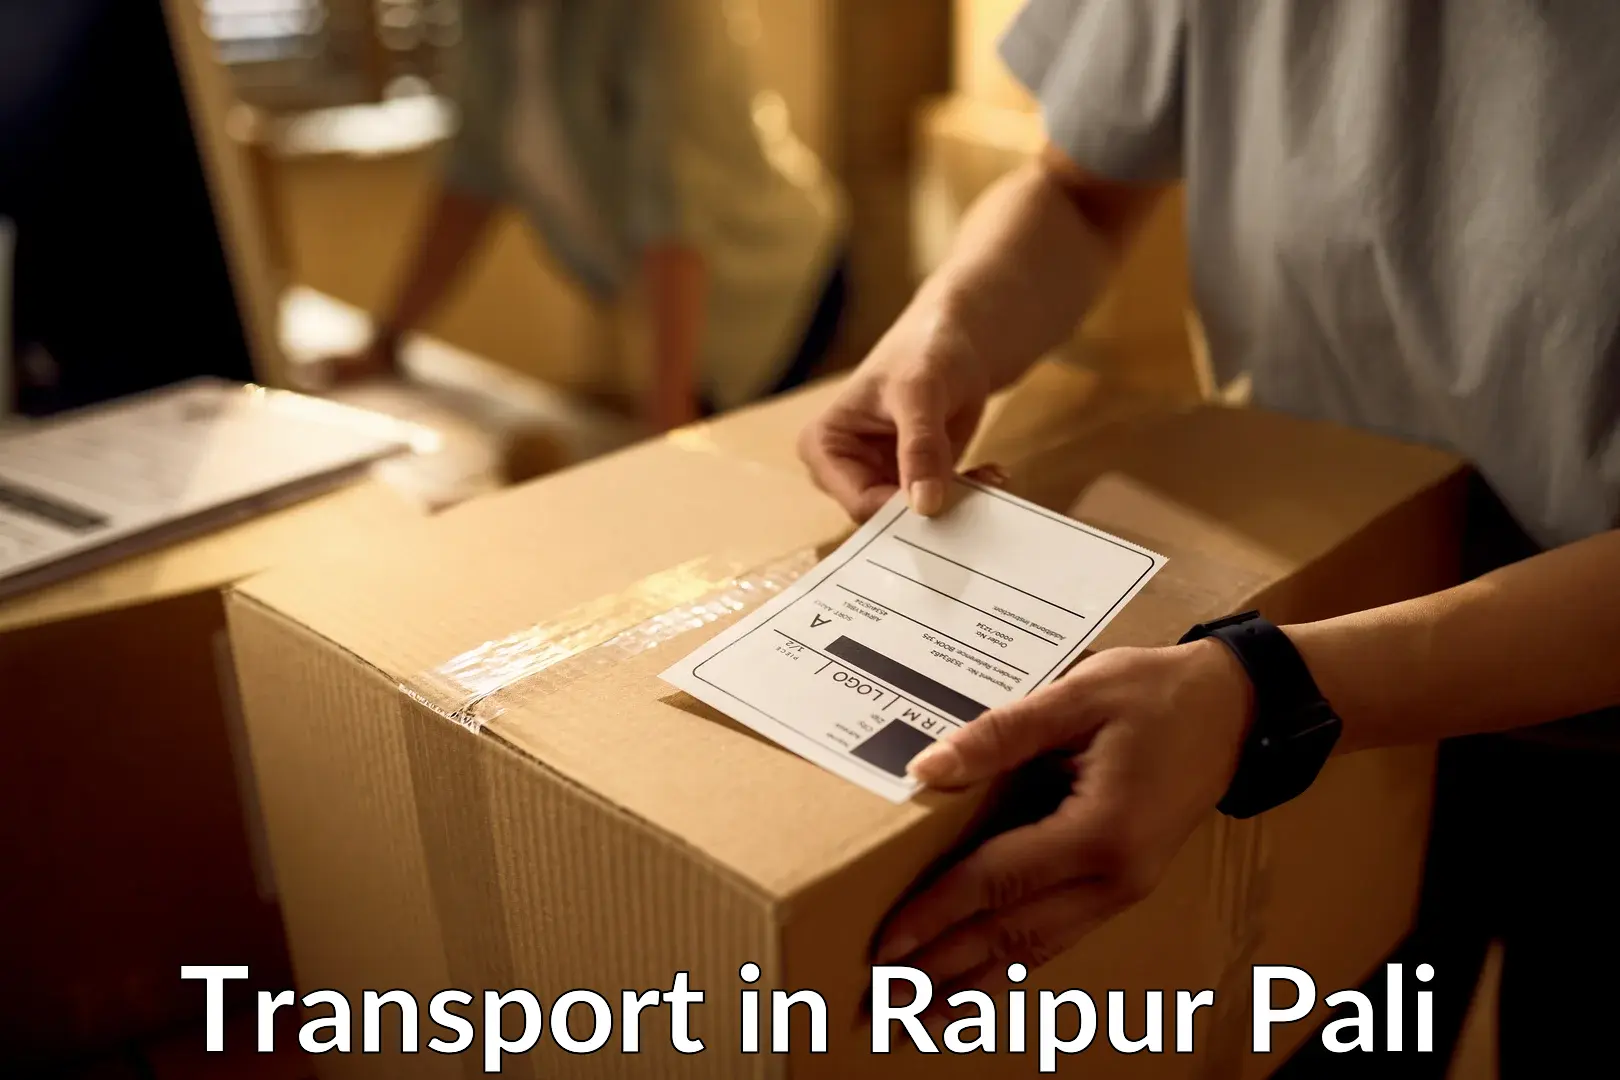 Daily parcel service transport in Raipur Pali